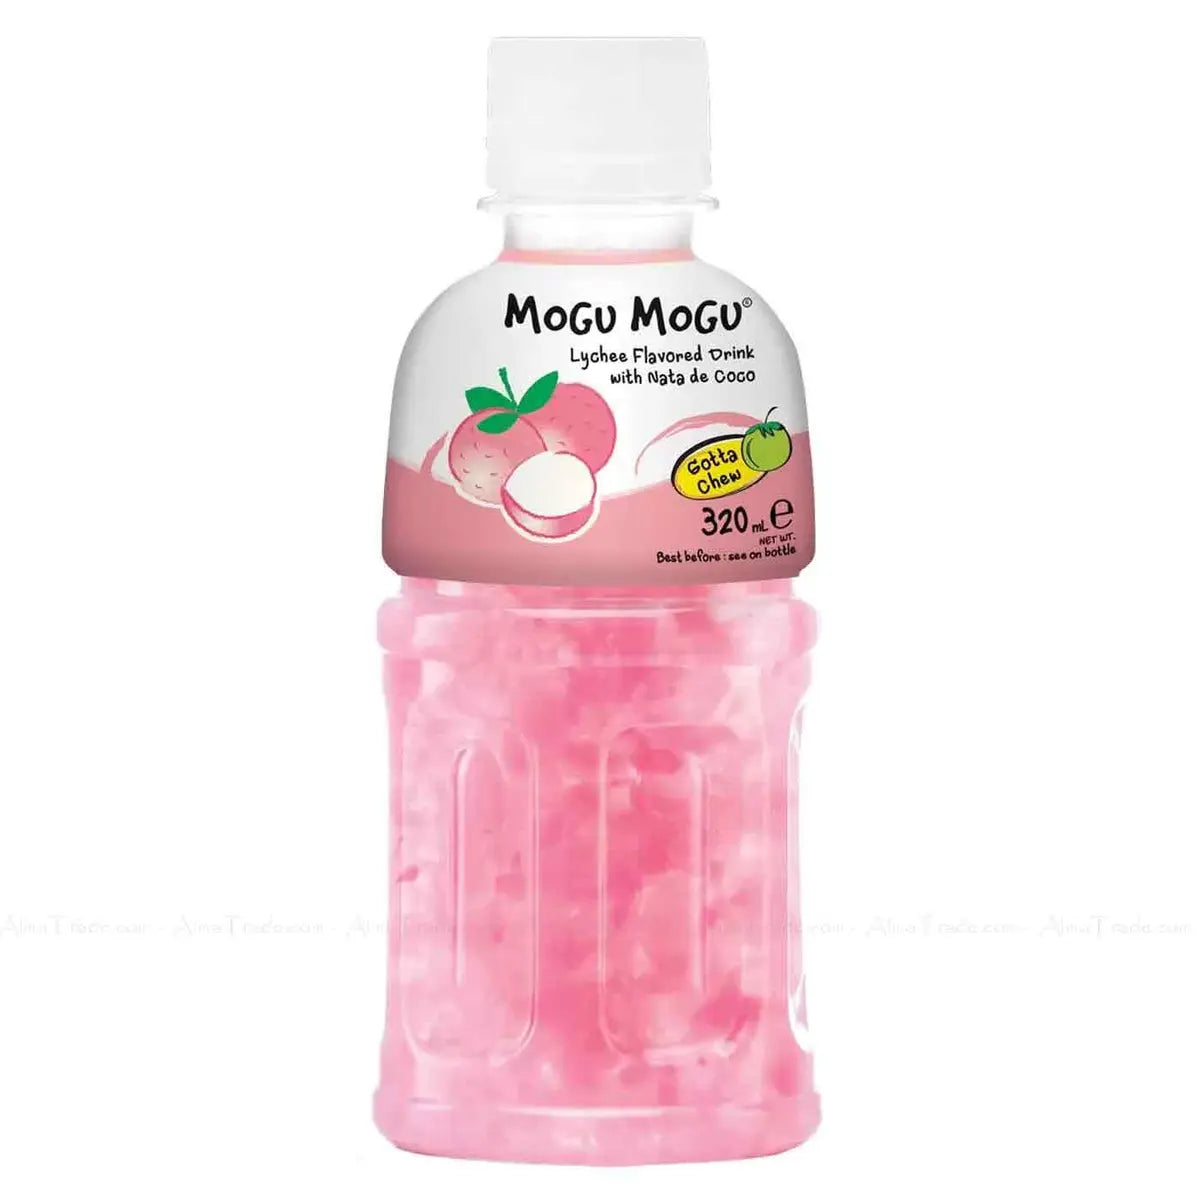 Mogu Mogu Lychee Flavored Drink with Nata de Coco 320ml - Pack of 24 - Candy Strike UK